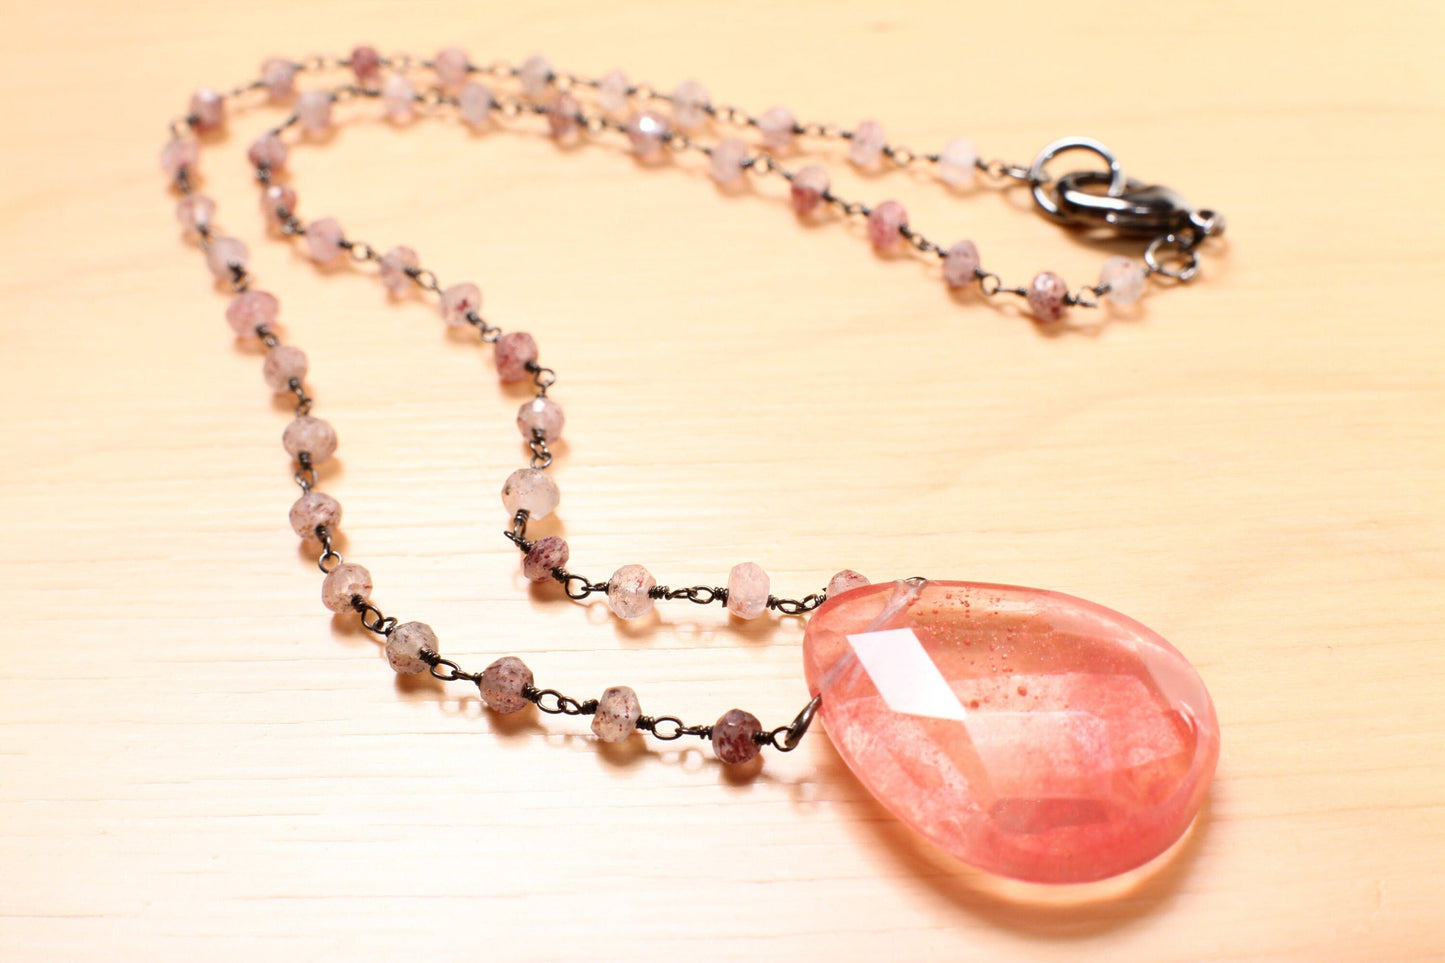 Strawberry Quartz Faceted Pear Drop Pendant in Strawberry Quartz Wire Wrapped Rosary Chain Necklace plus 3&quot; Extension. Gift